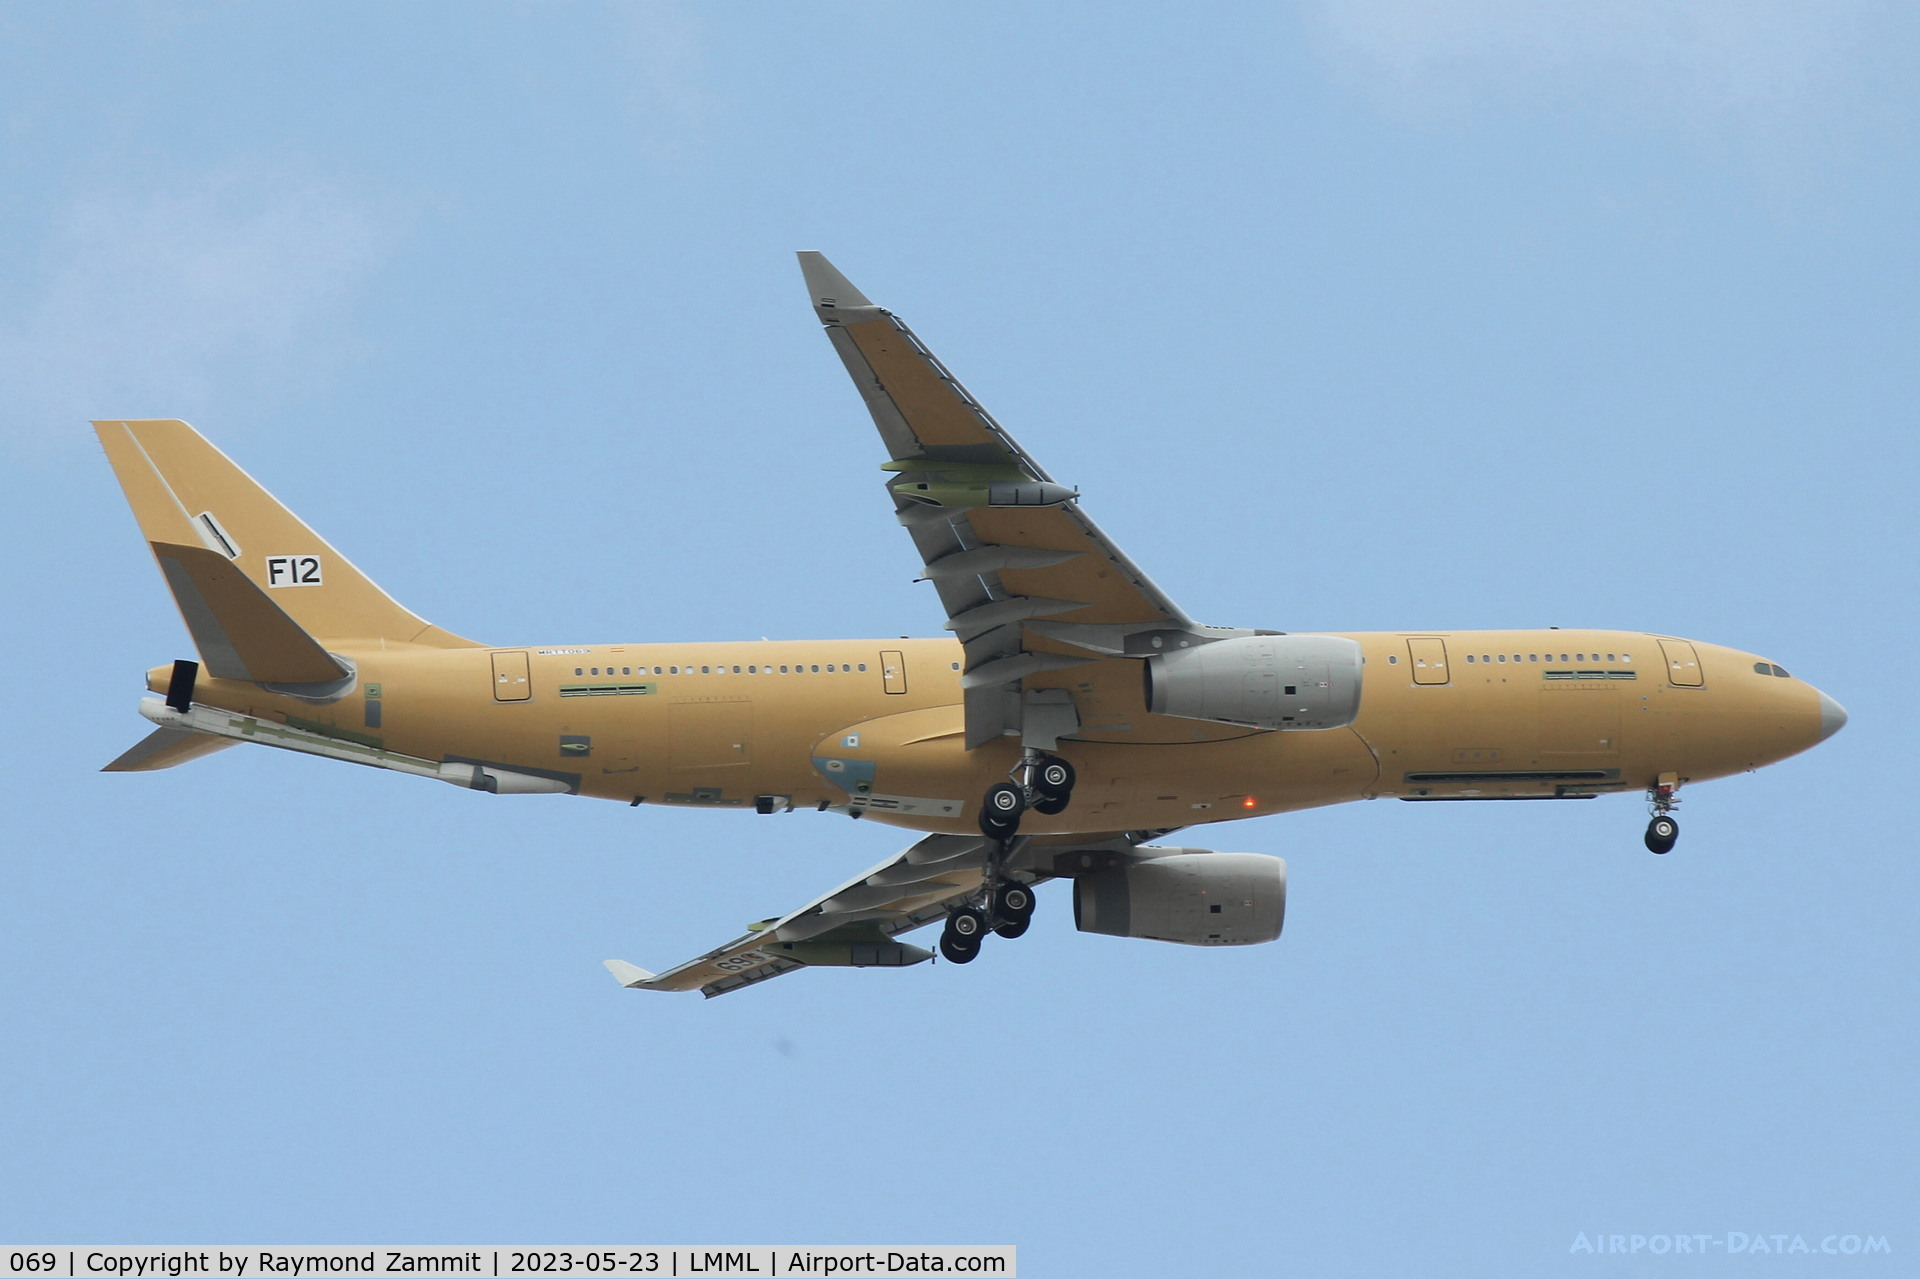 069, 2021 Airbus 330-243 (MRTT) Phenix C/N 2015, Airbus 330 MRTT 069/F12 French Air Force seen landing in Malta for repainting in French Air Force colours.